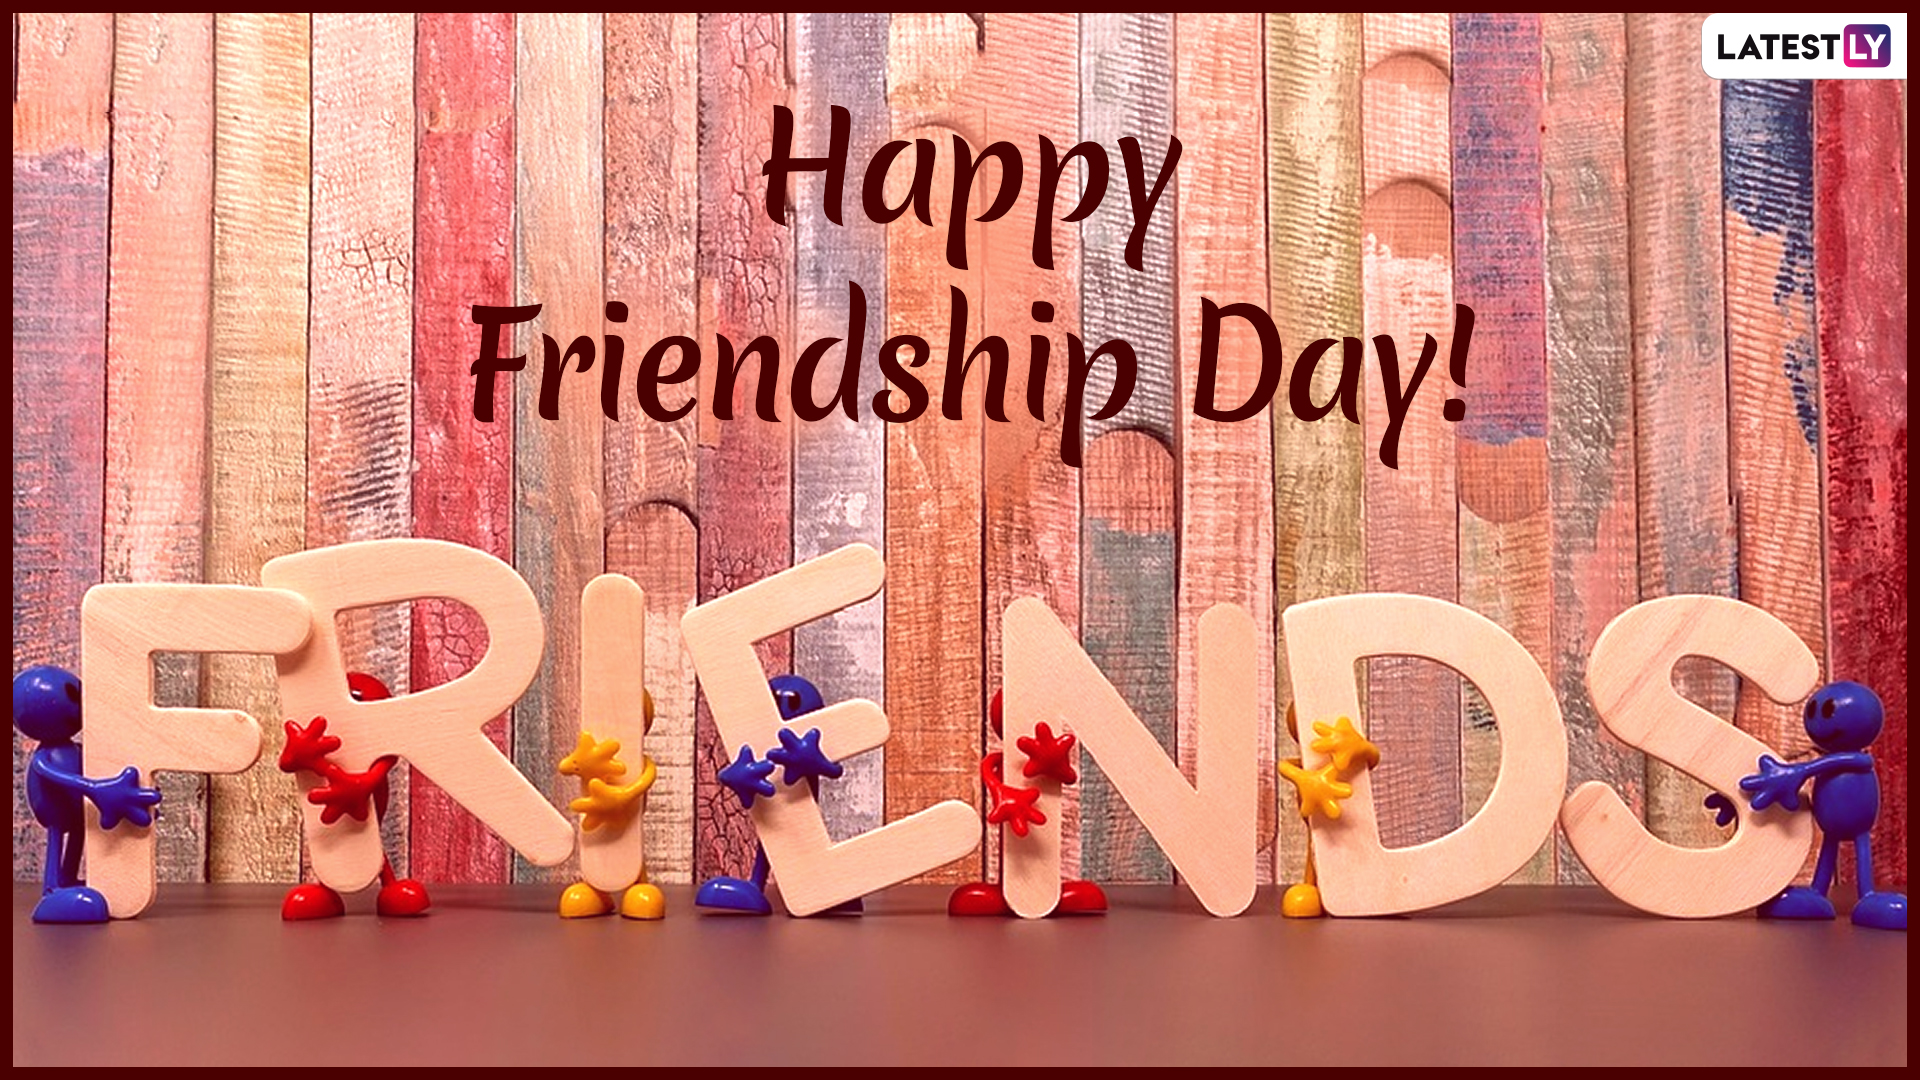 Friendship Day Images & HD Wallpapers for Free Download Online Wish